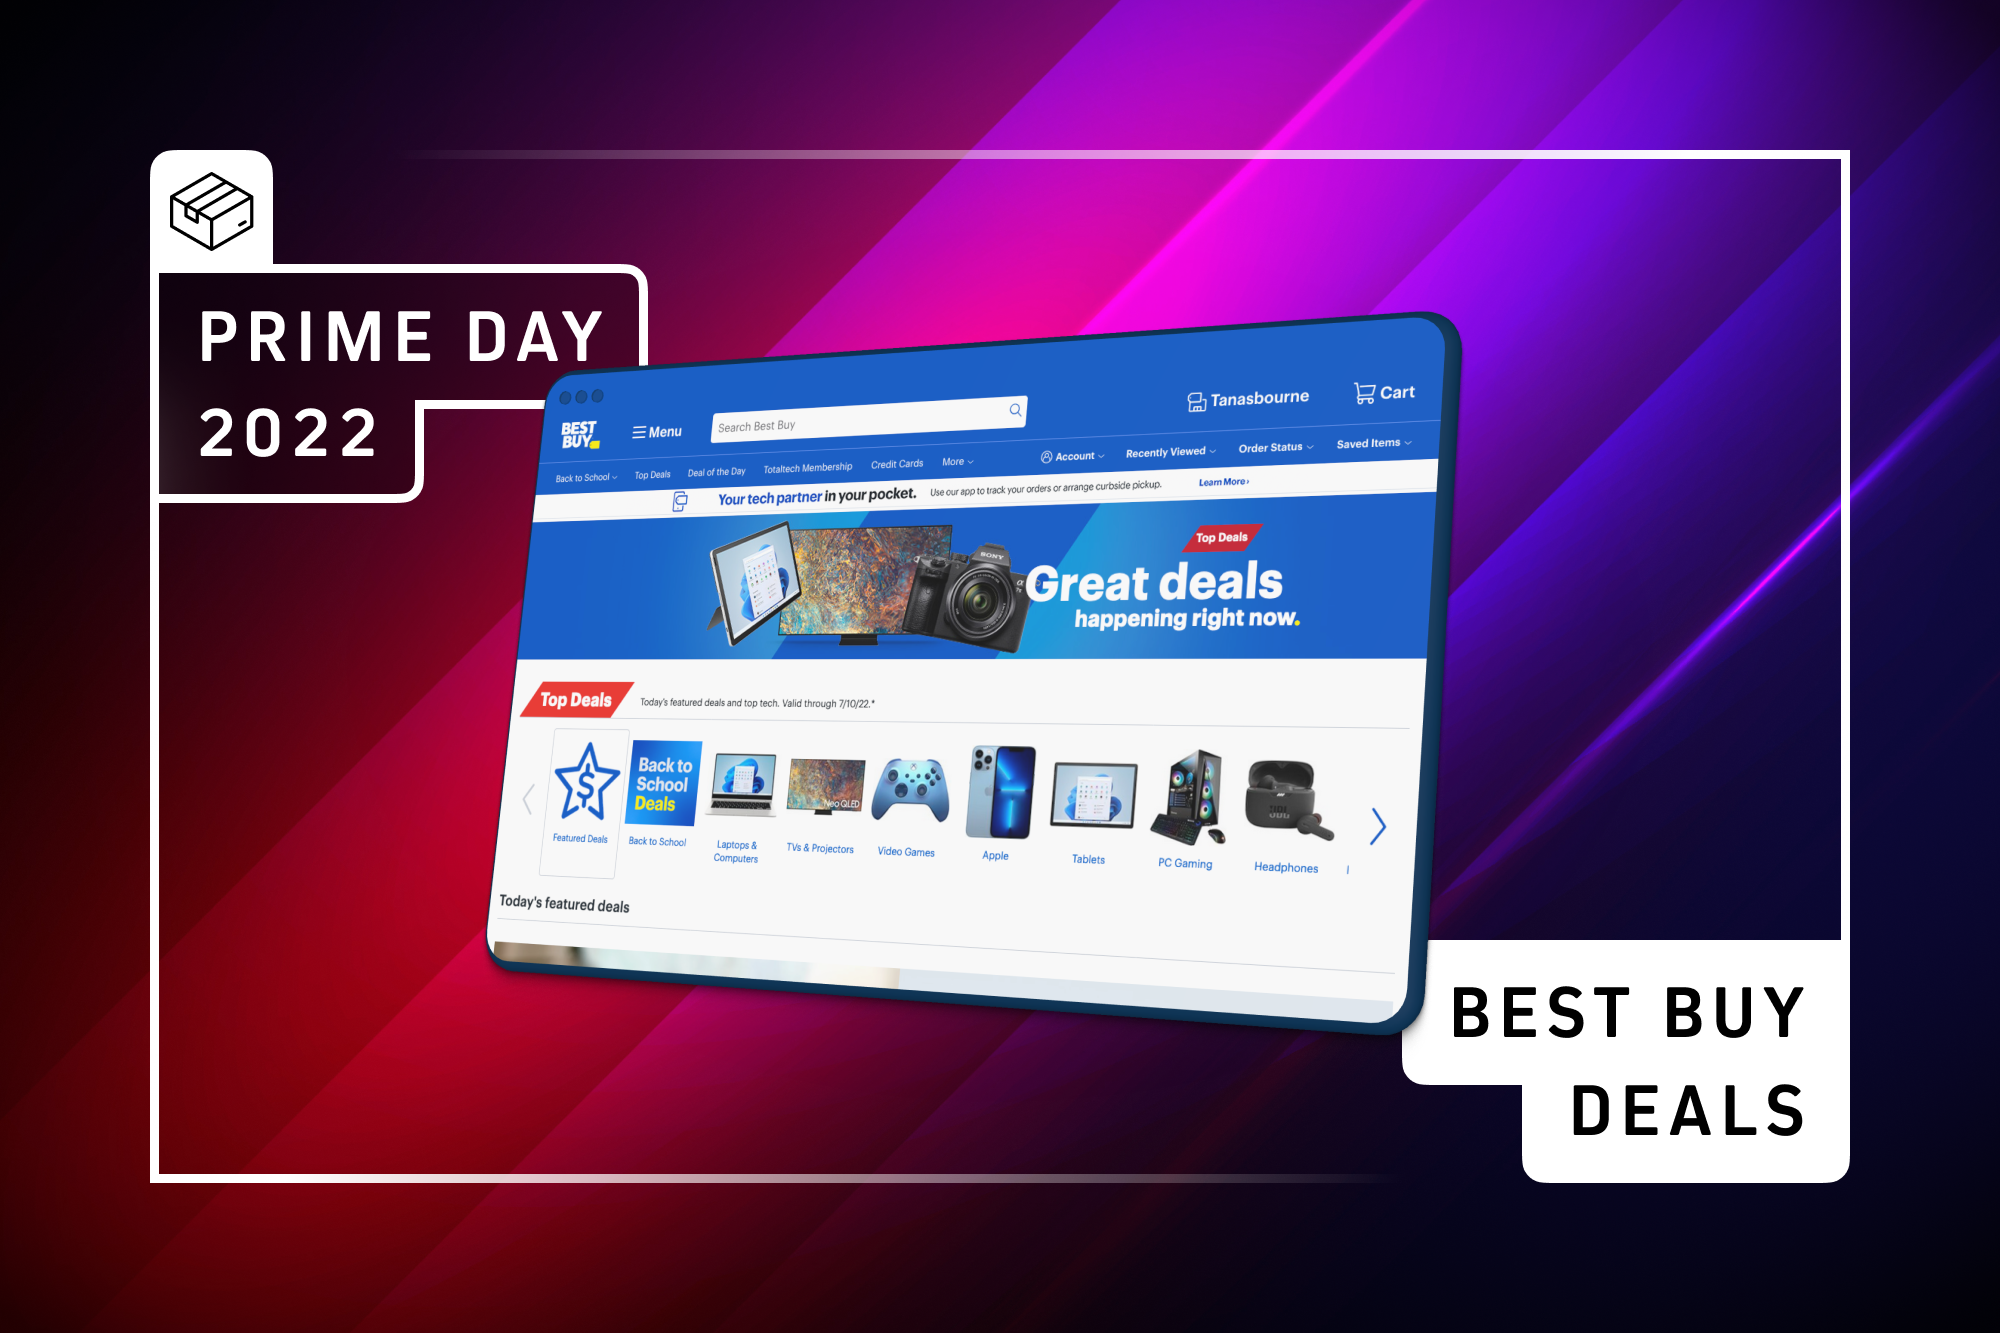 The Best Deals For Prime Big Deals Day, According To A Sales Price